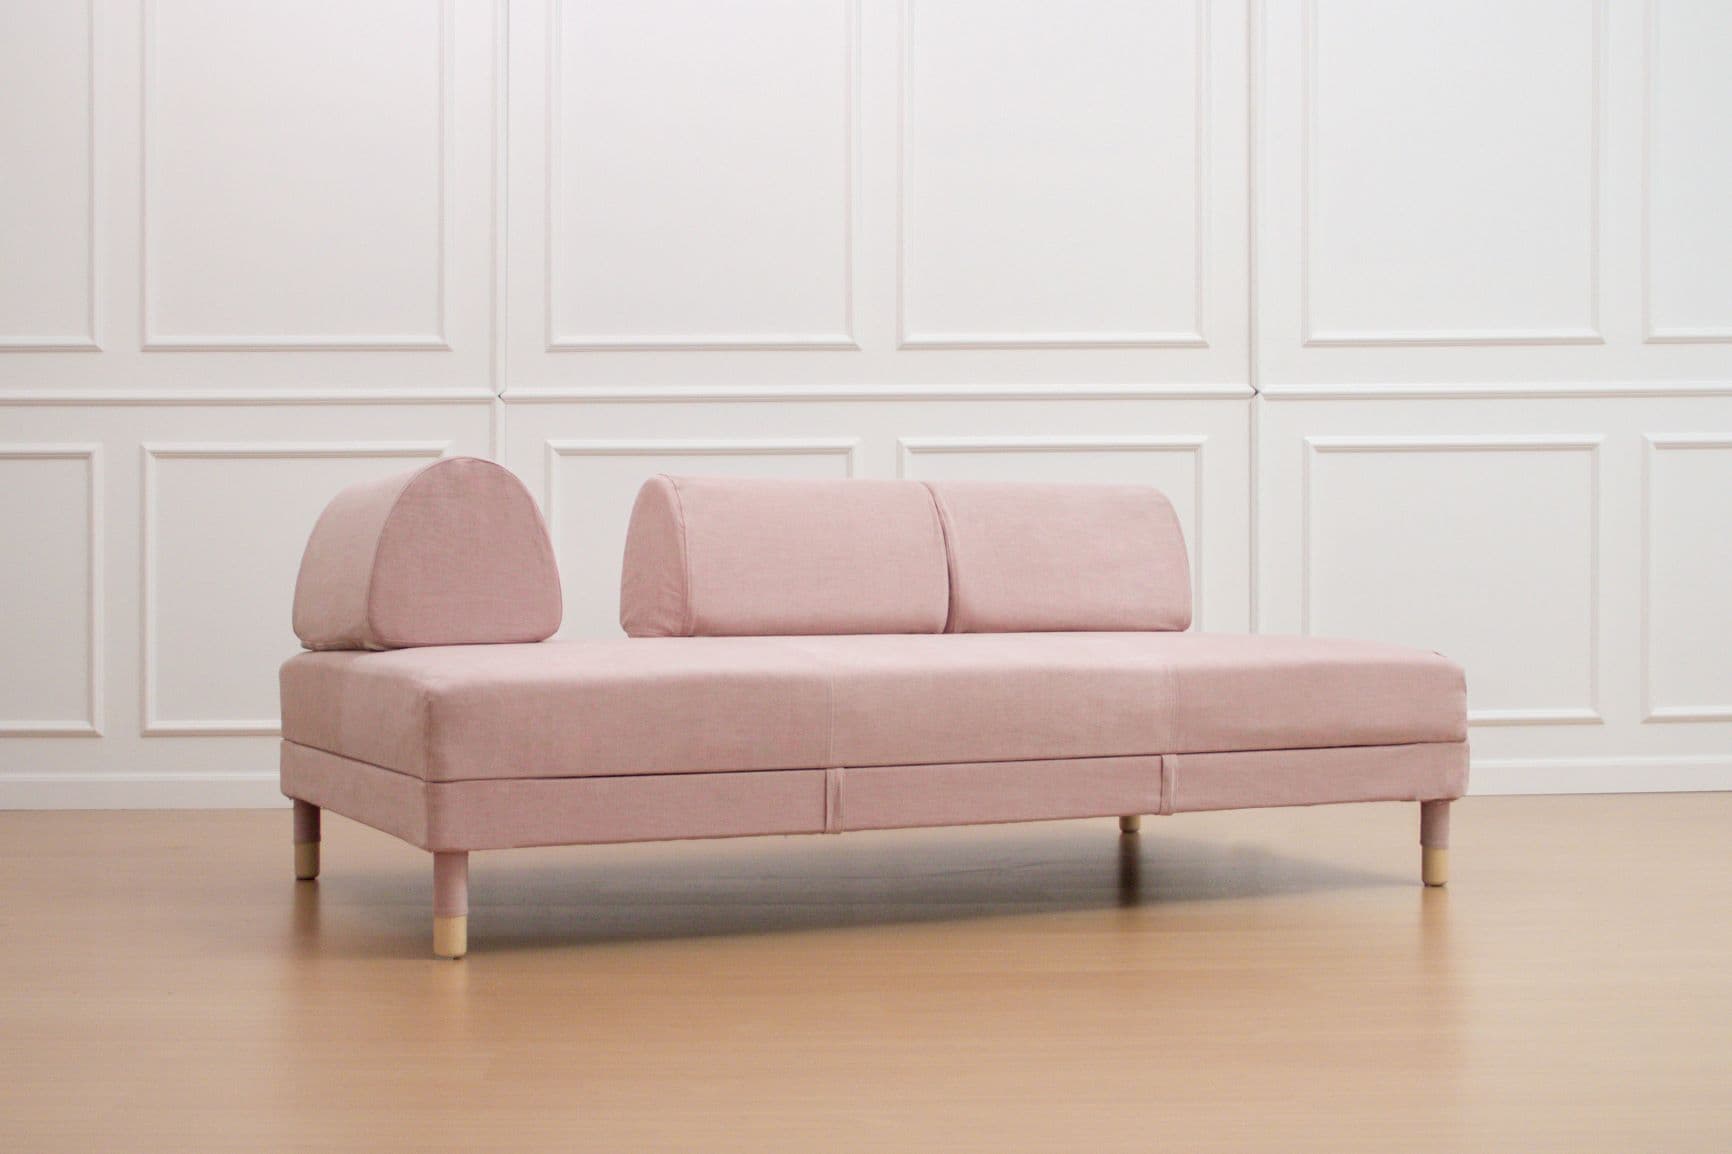 IKEA Flottebo sofa bed in a light pink rose Brushed Cotton cover